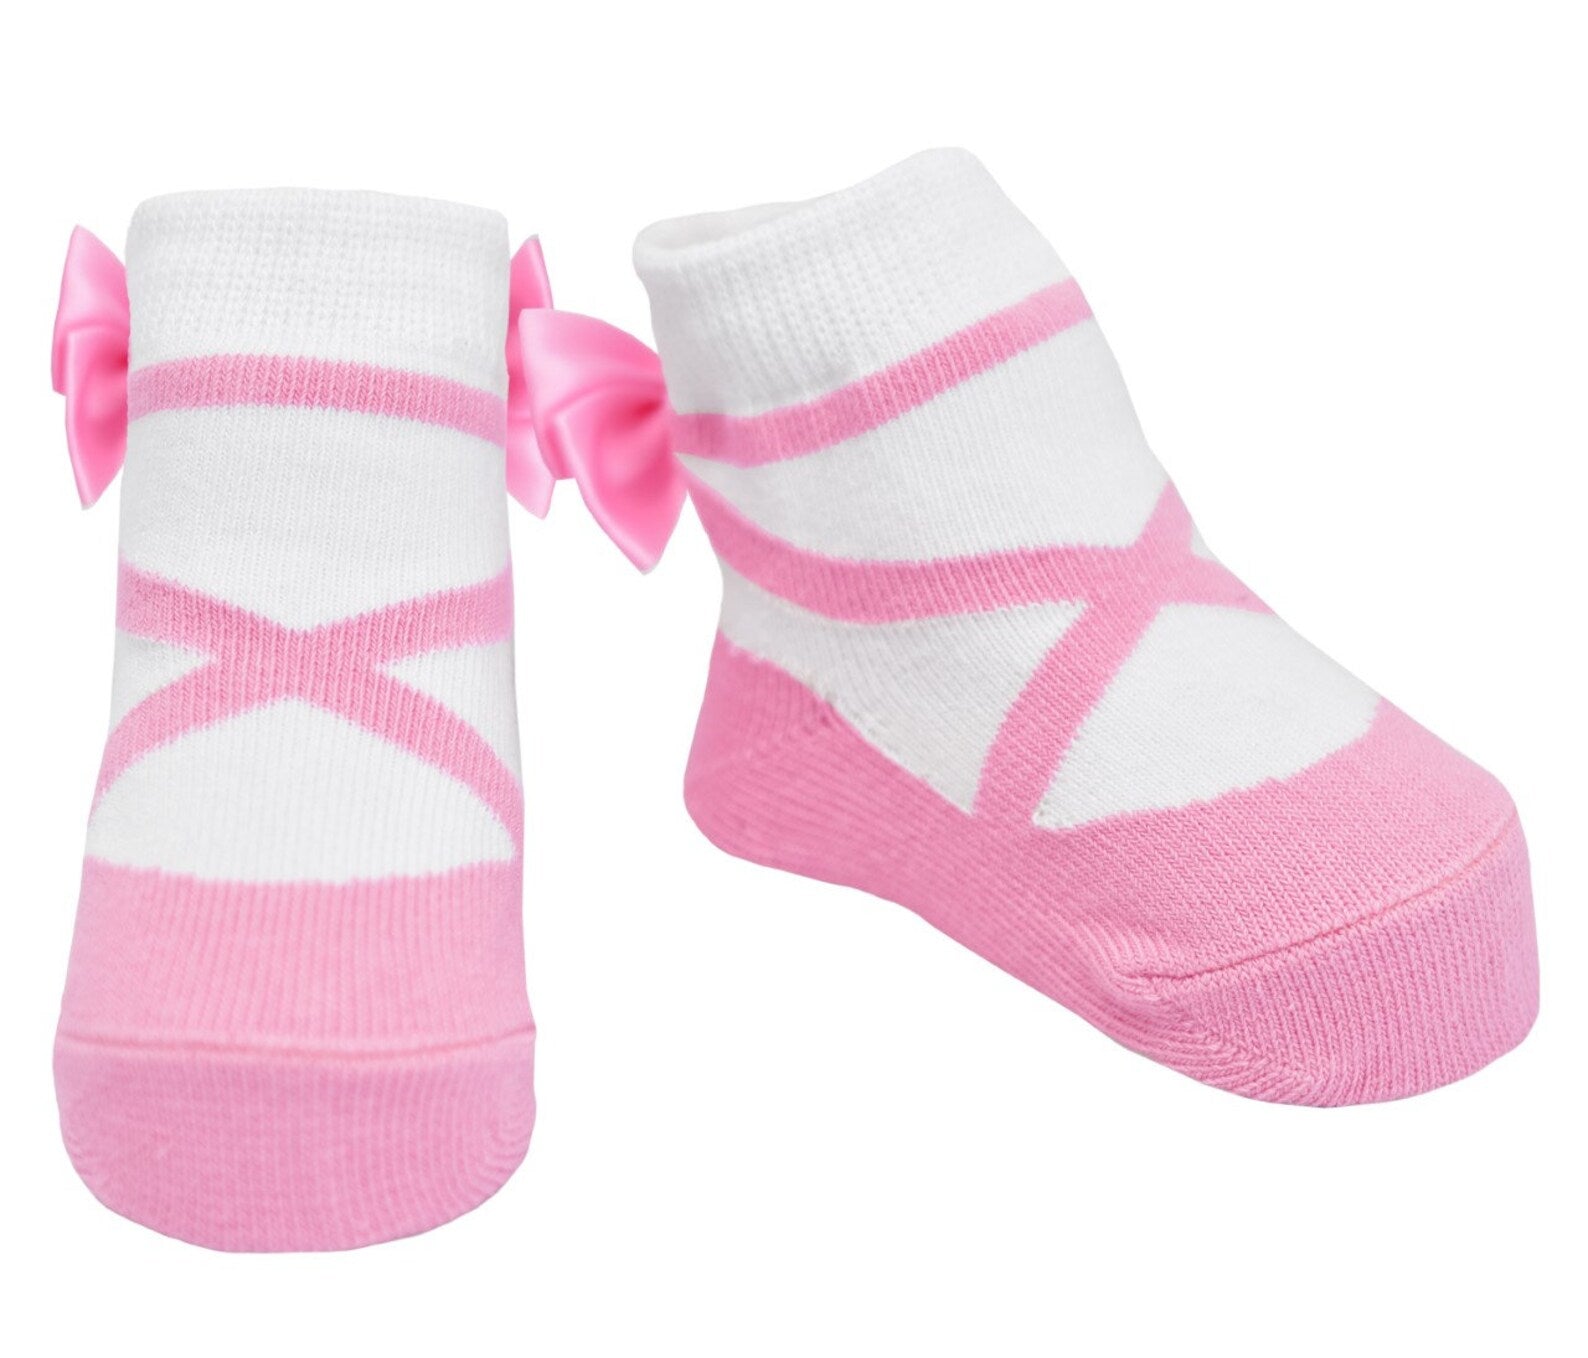 Pink ballerina socks that look like ballet shoes with pink satin bows gift packaged 6 pairs by Baby Emporio